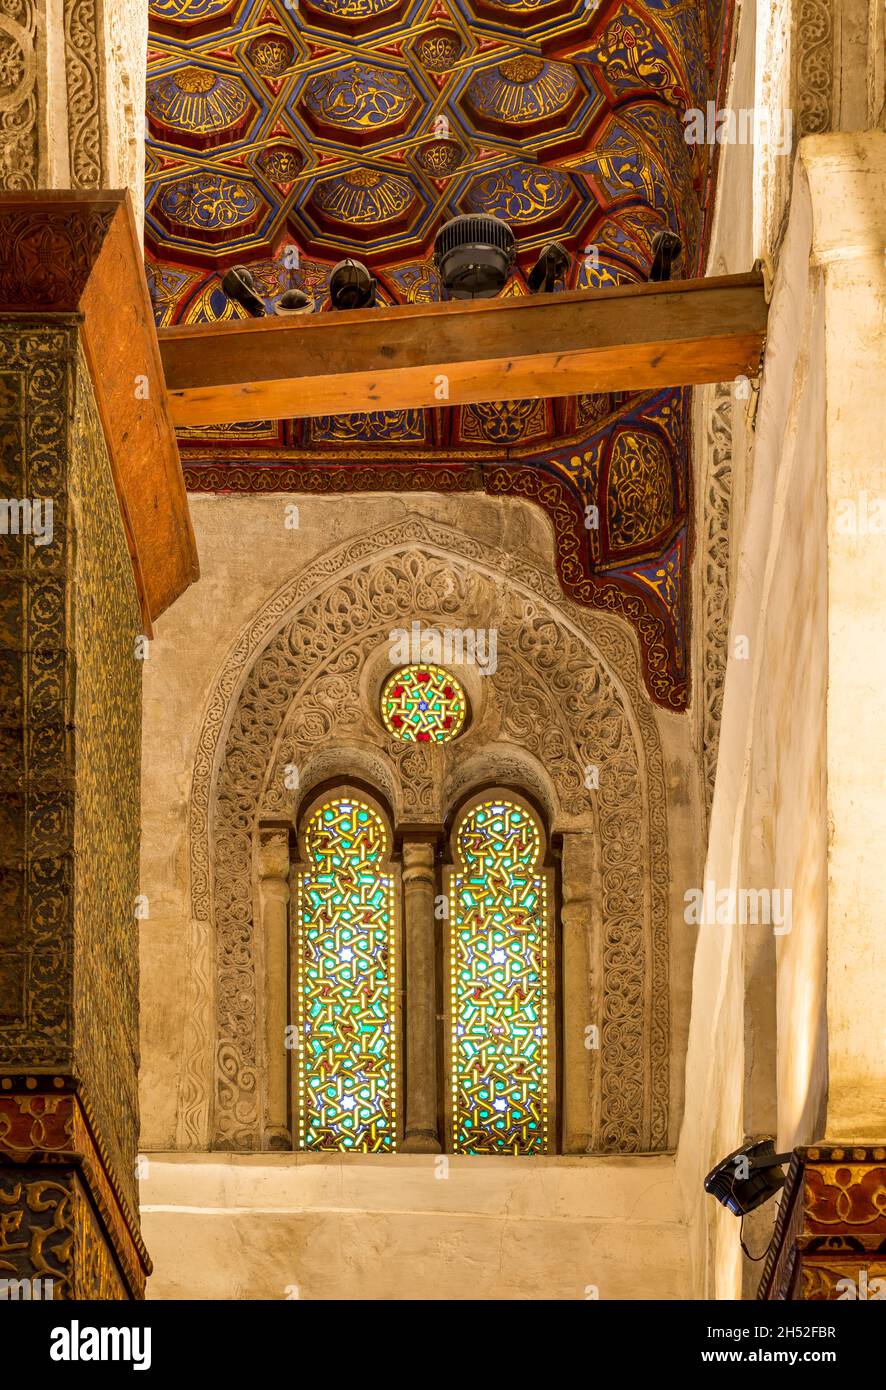 Two adjacent perforated stucco arched windows decorated with colorful stain glass with geometrical and floral patterns, at Mamluk era public historical Qalawun complex, Moez Street, Cairo, Egypt Stock Photo